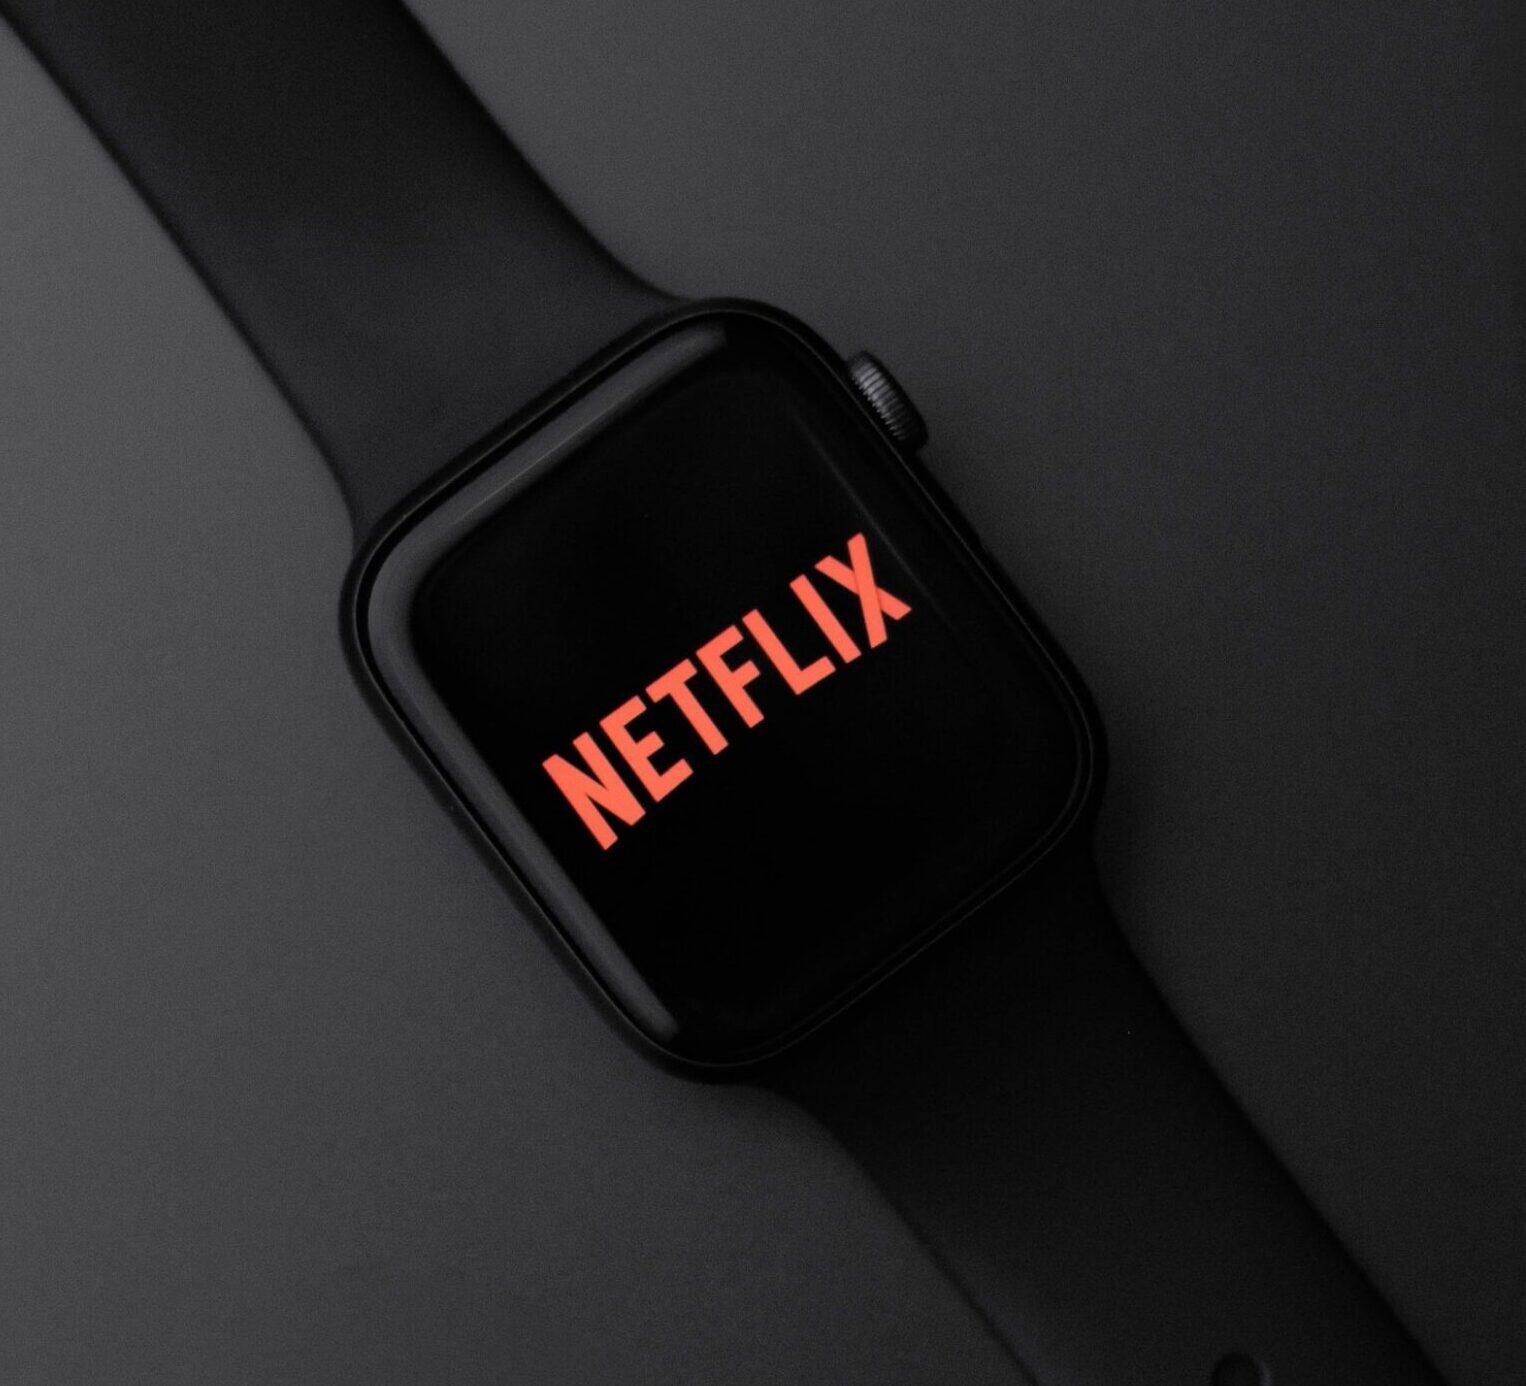 How to Watch Netflix on Apple Watch